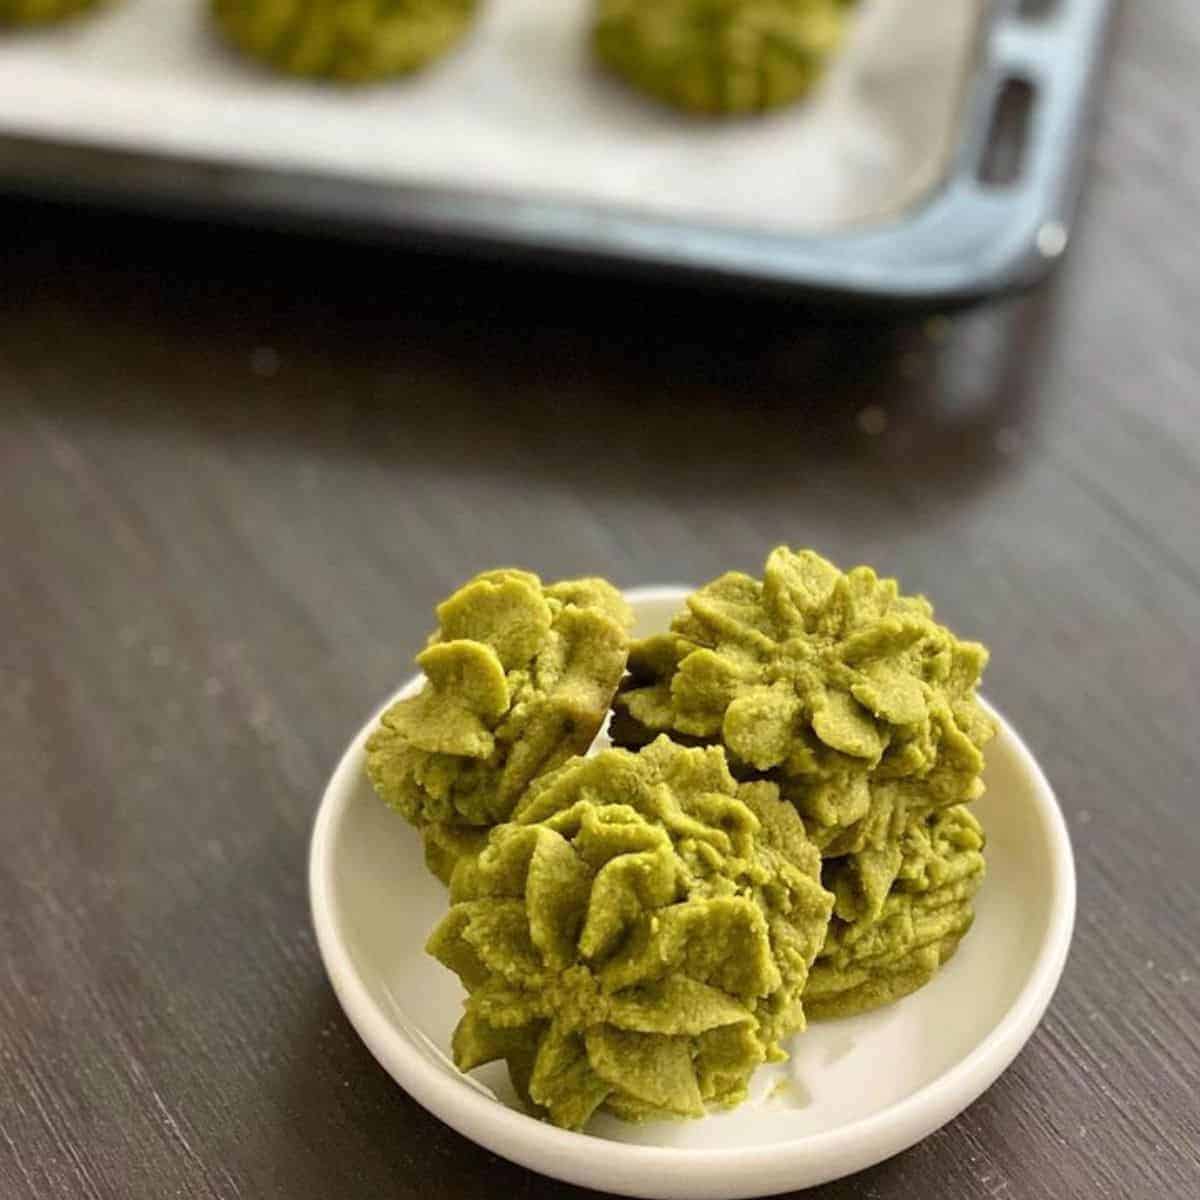 Mini green tea biscuits with artistic design in a small white plate with a blurry tray of cookies in the background